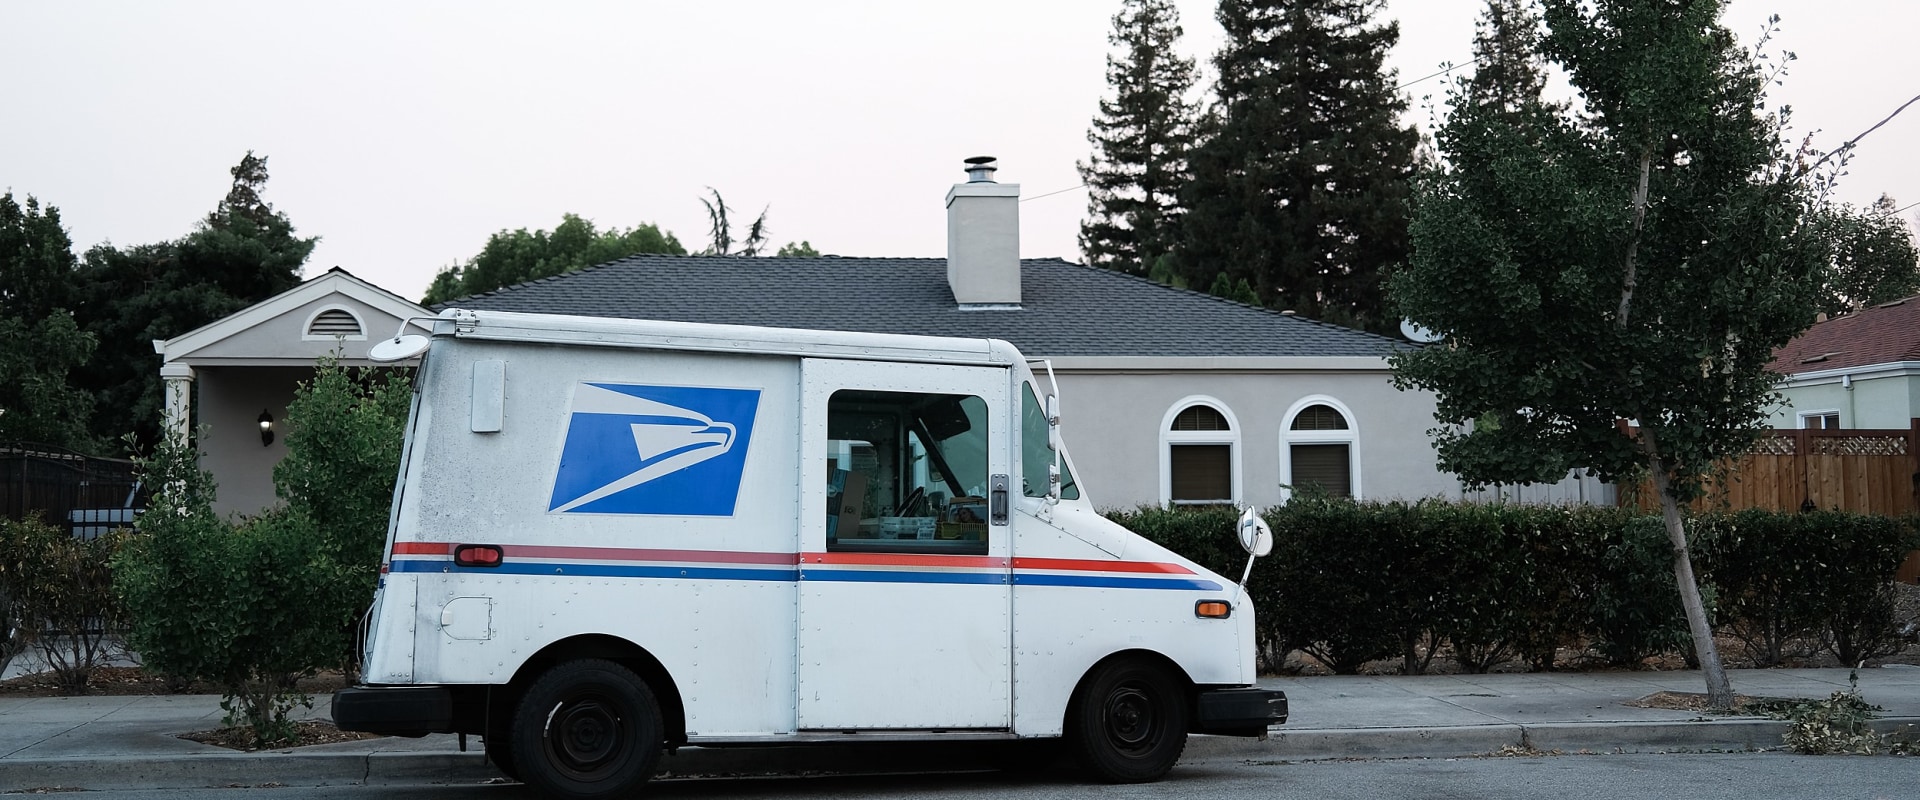 Stamp Collecting Services at Post Offices in Bronx, New York - Get the Best Deals Now!